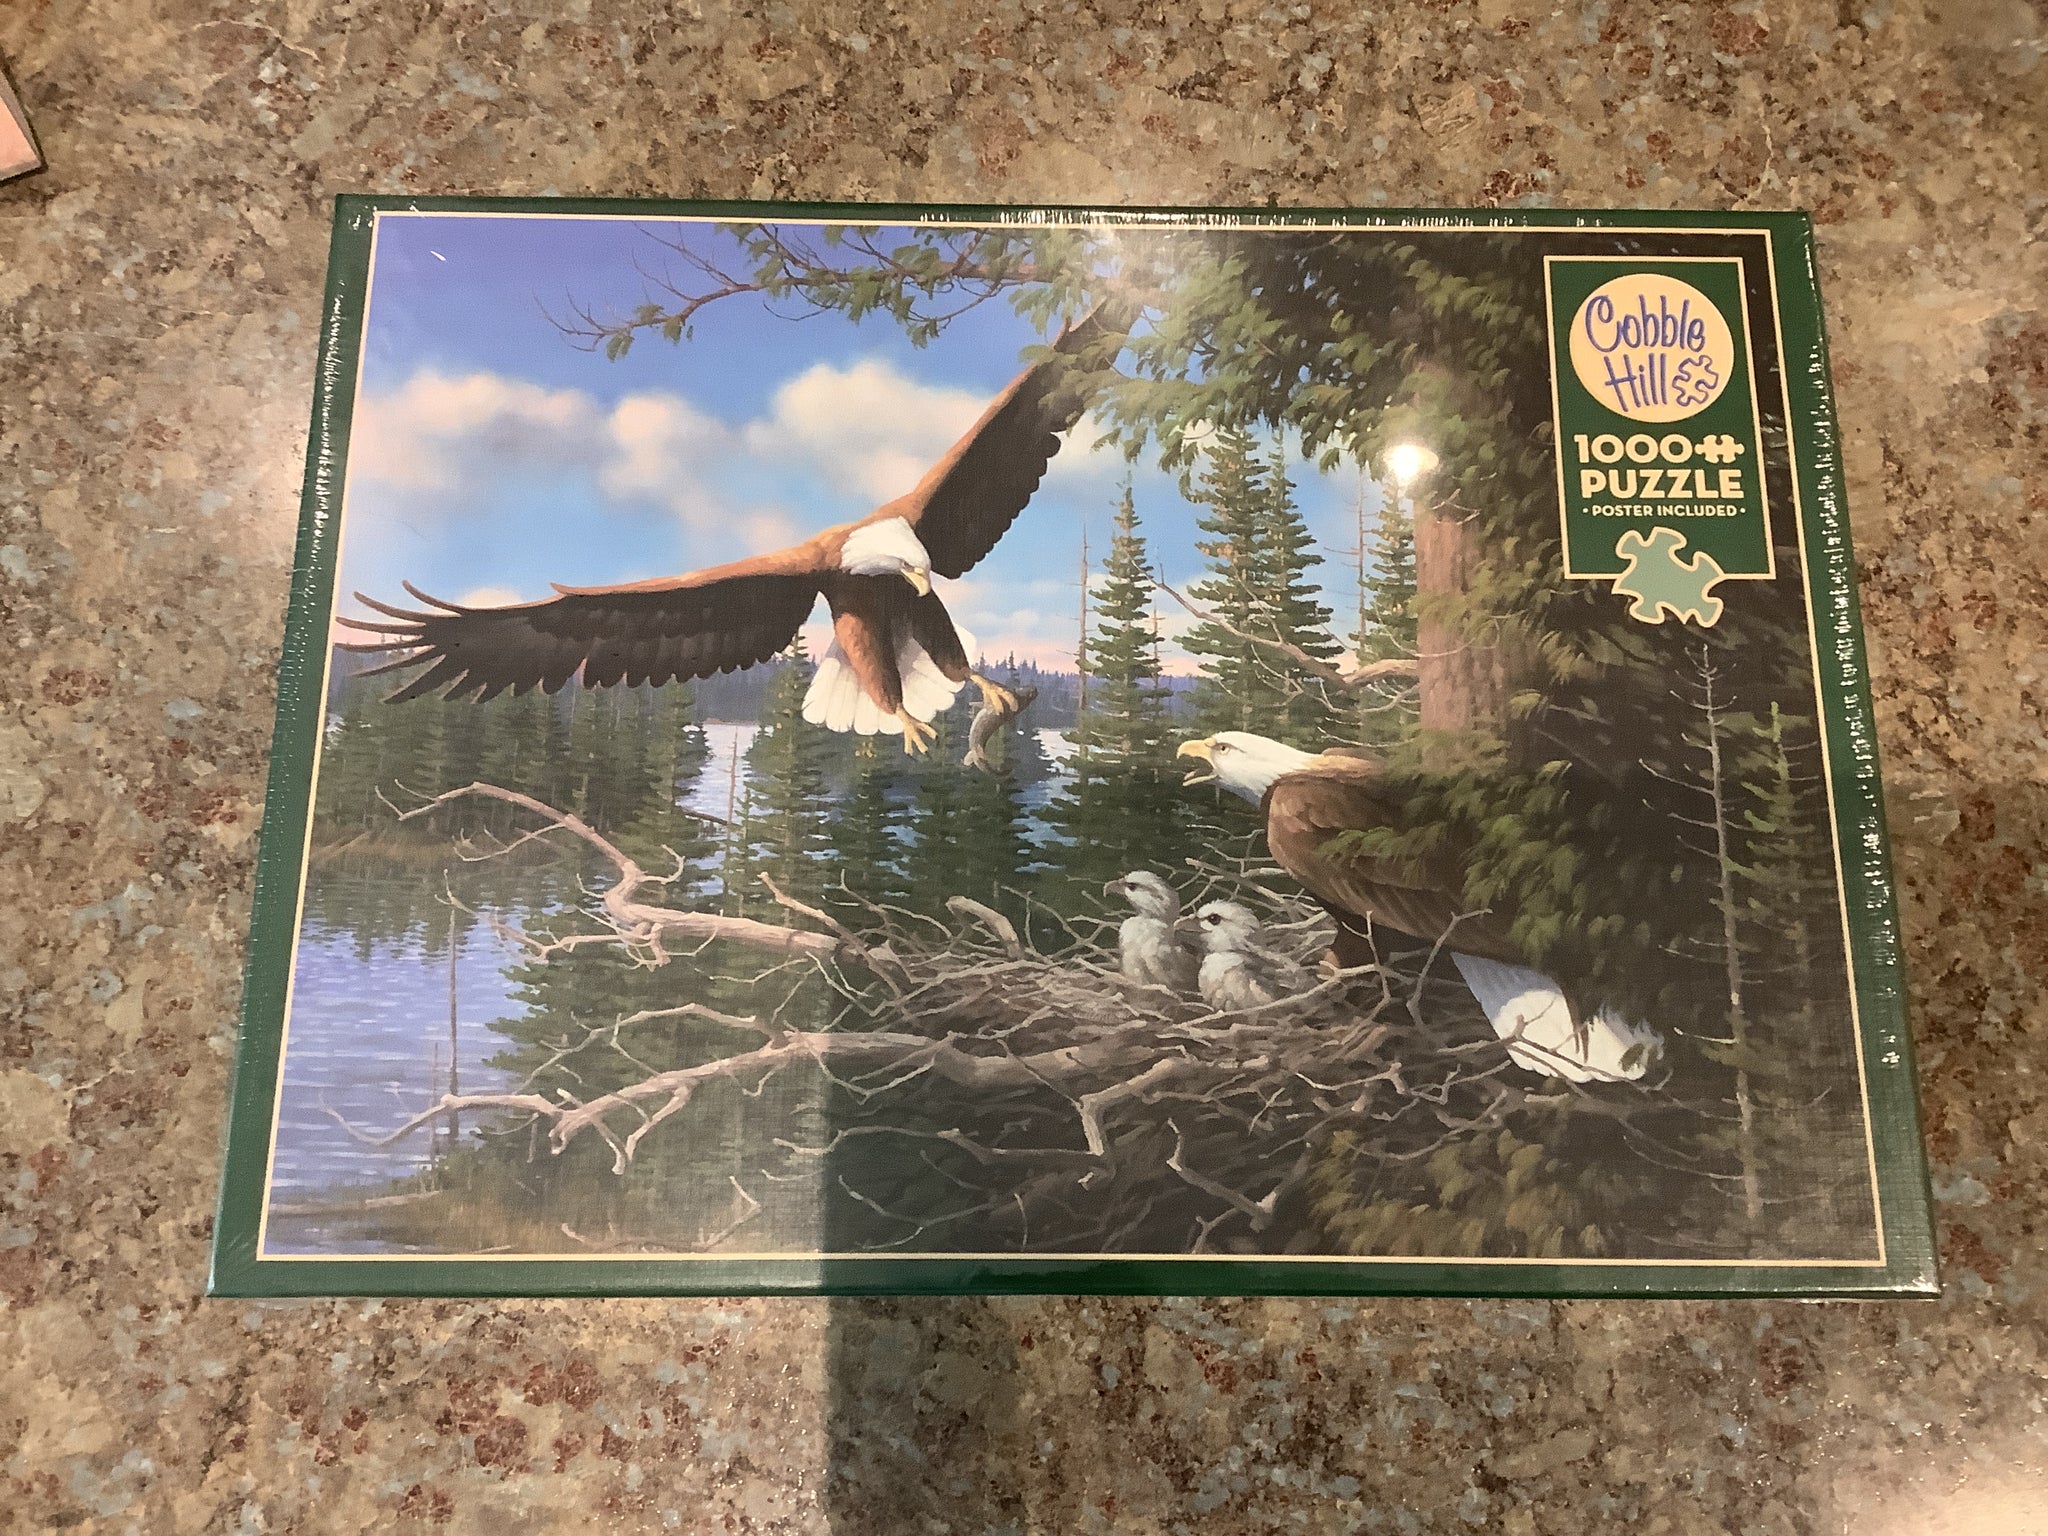 Nesting Eagles Cobble Hill 1000 puzzle poster included